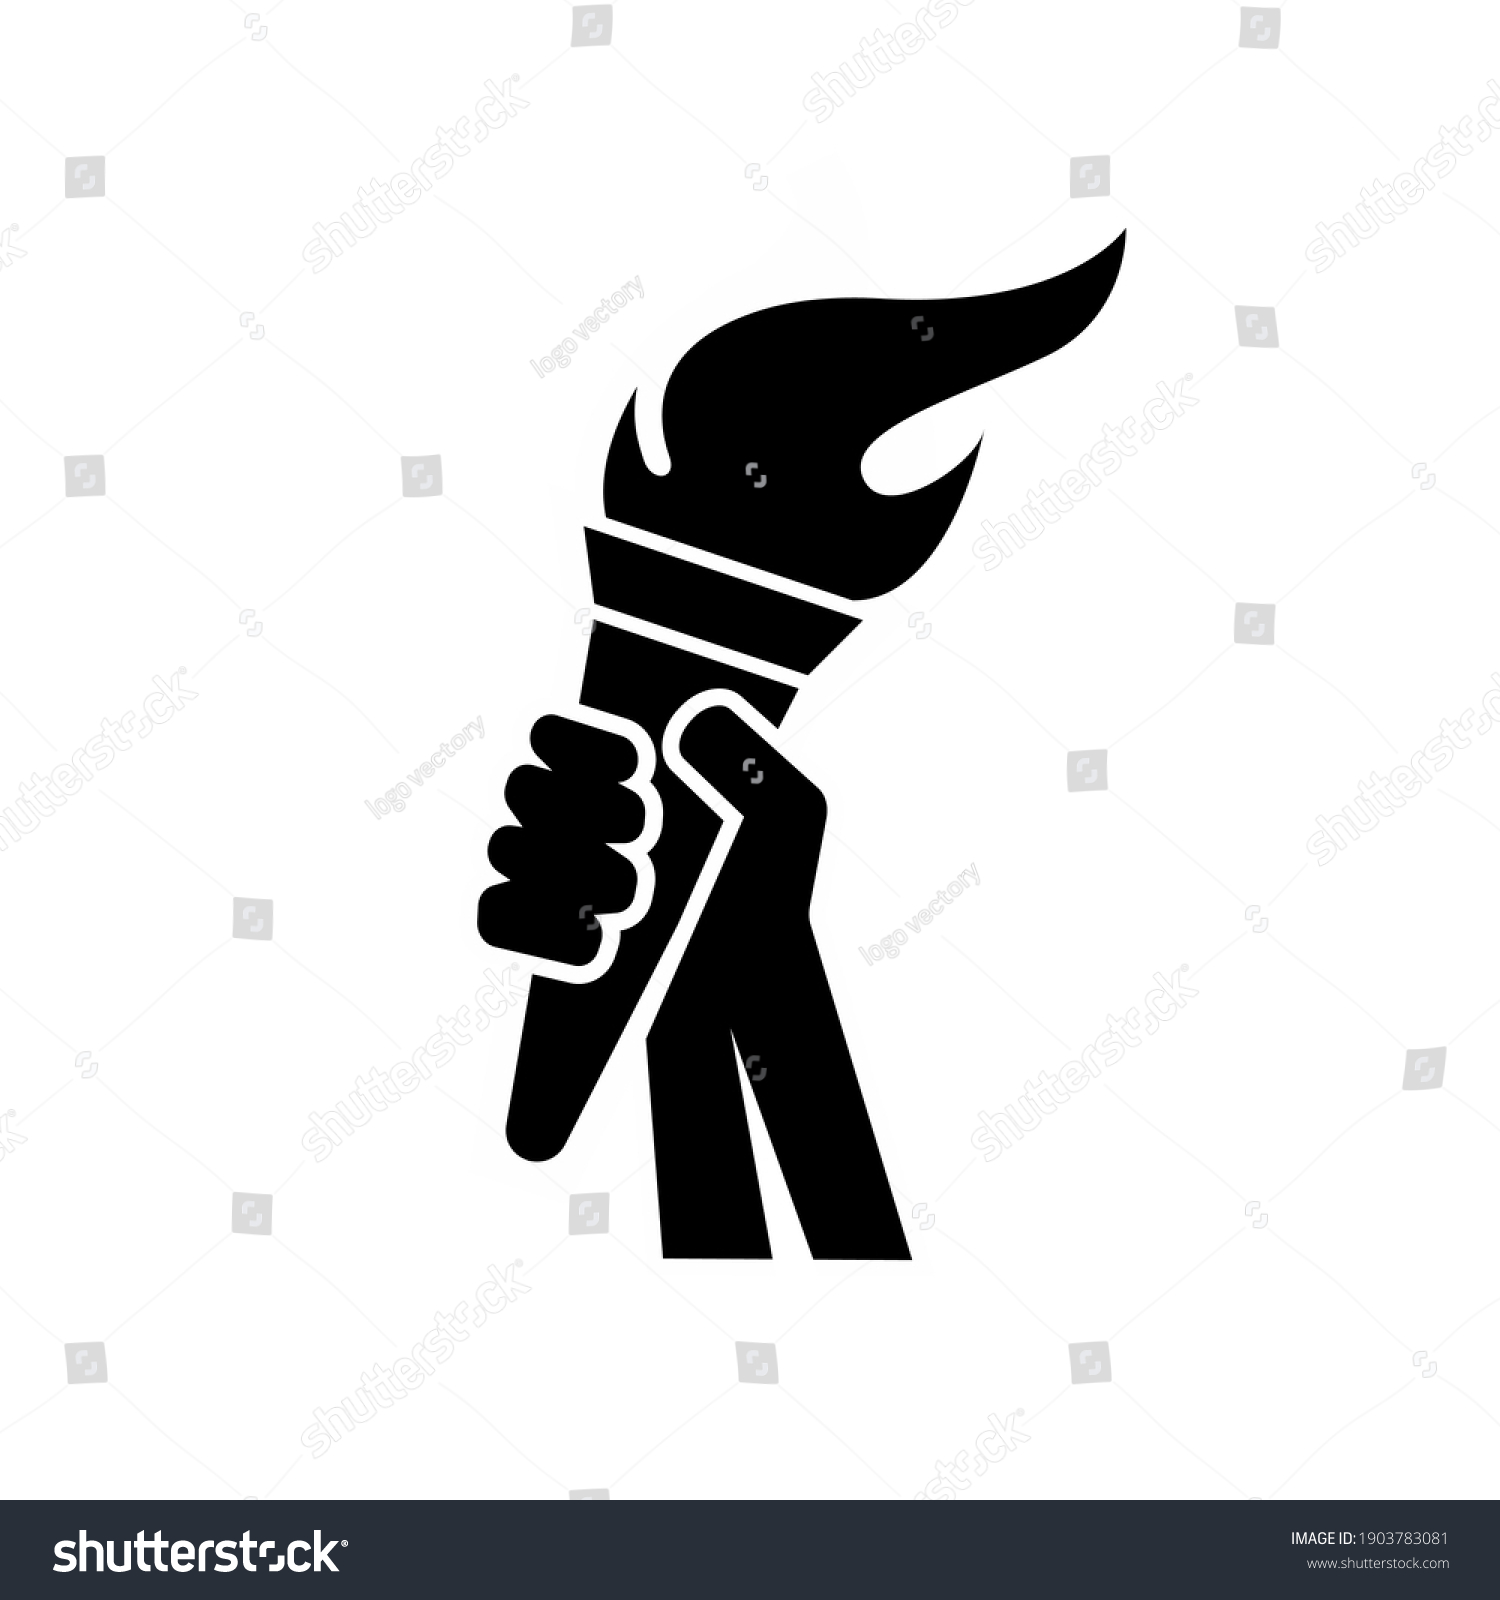 hand holding Flaming torch concept sports or freedom logo design vector illustration icon template isolated background #1903783081